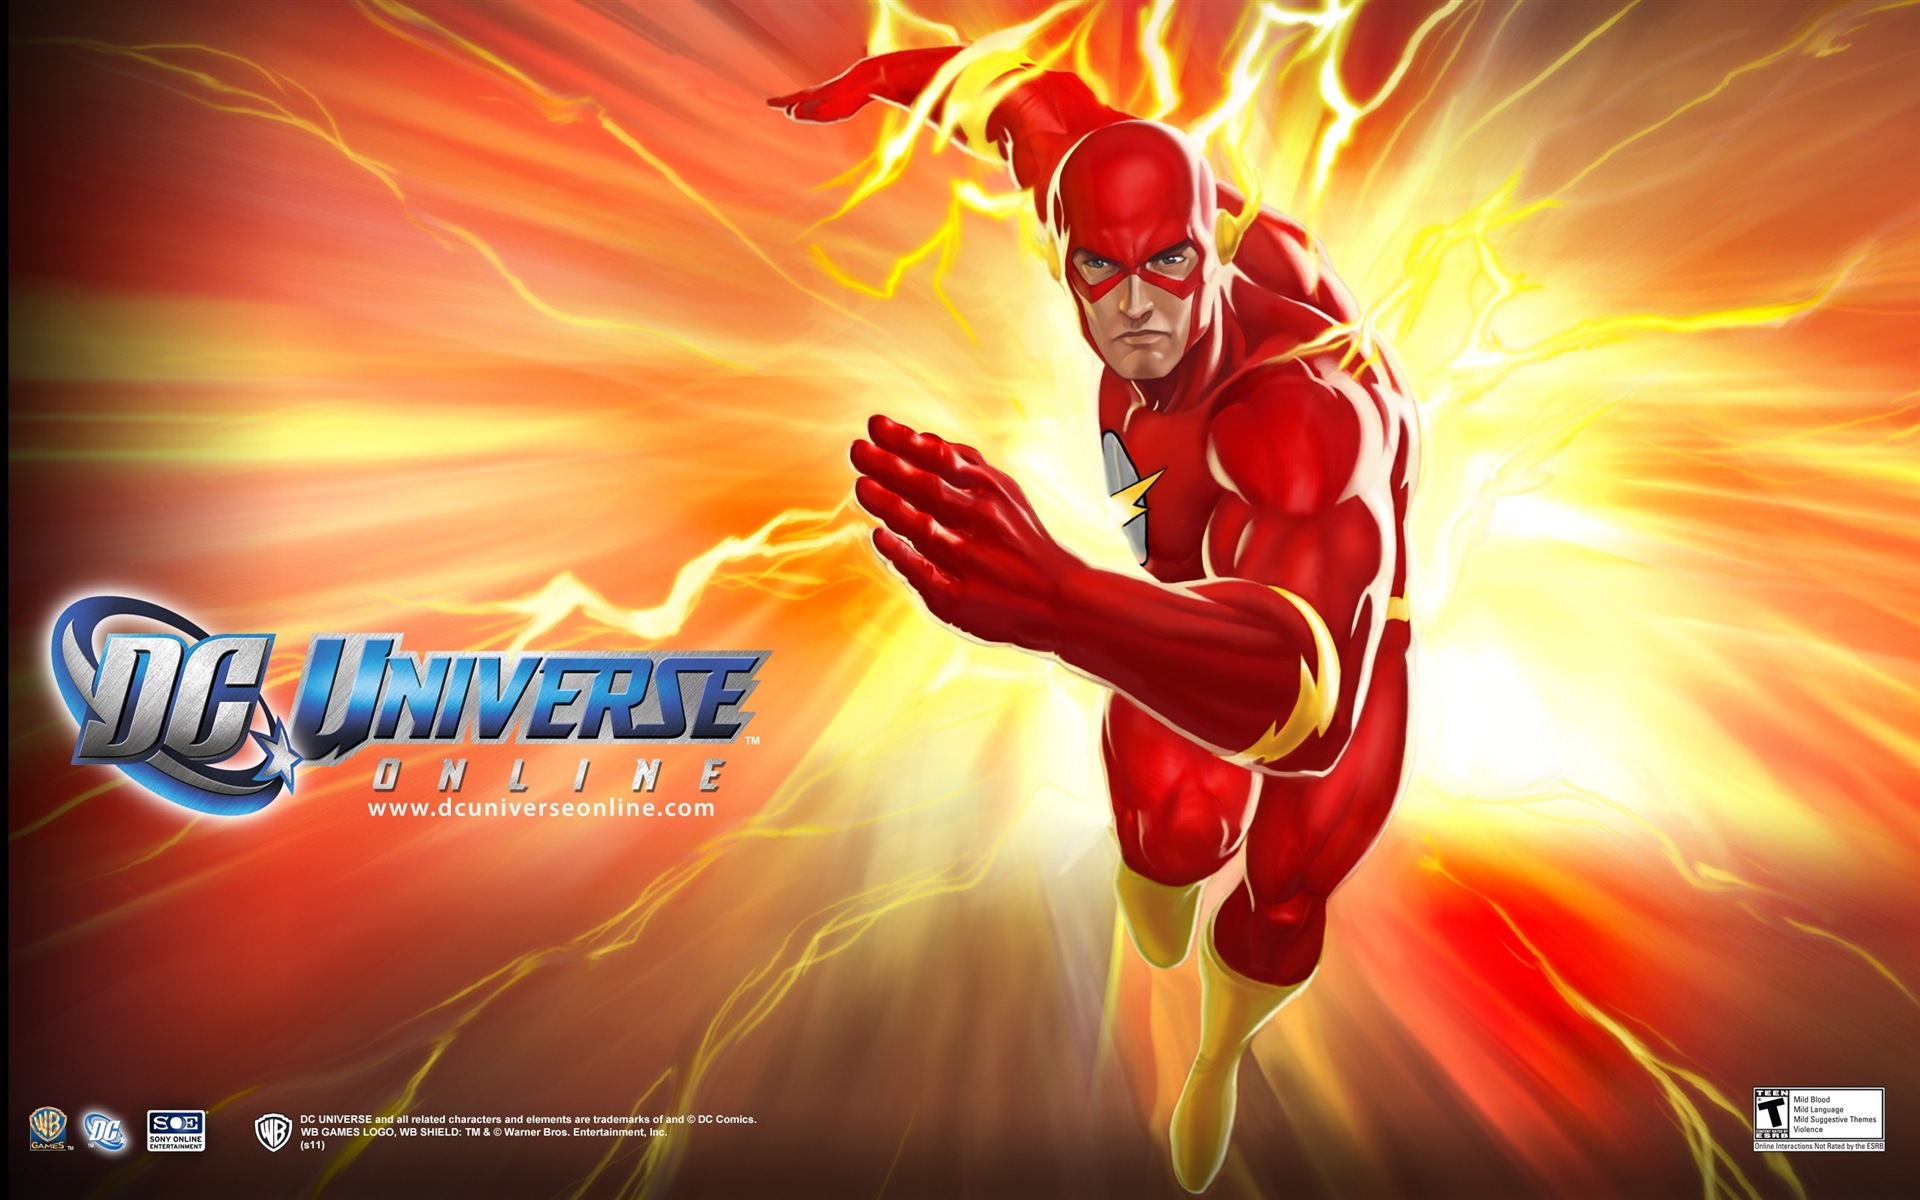 DC Universe Online HD game wallpapers #16 - 1920x1200